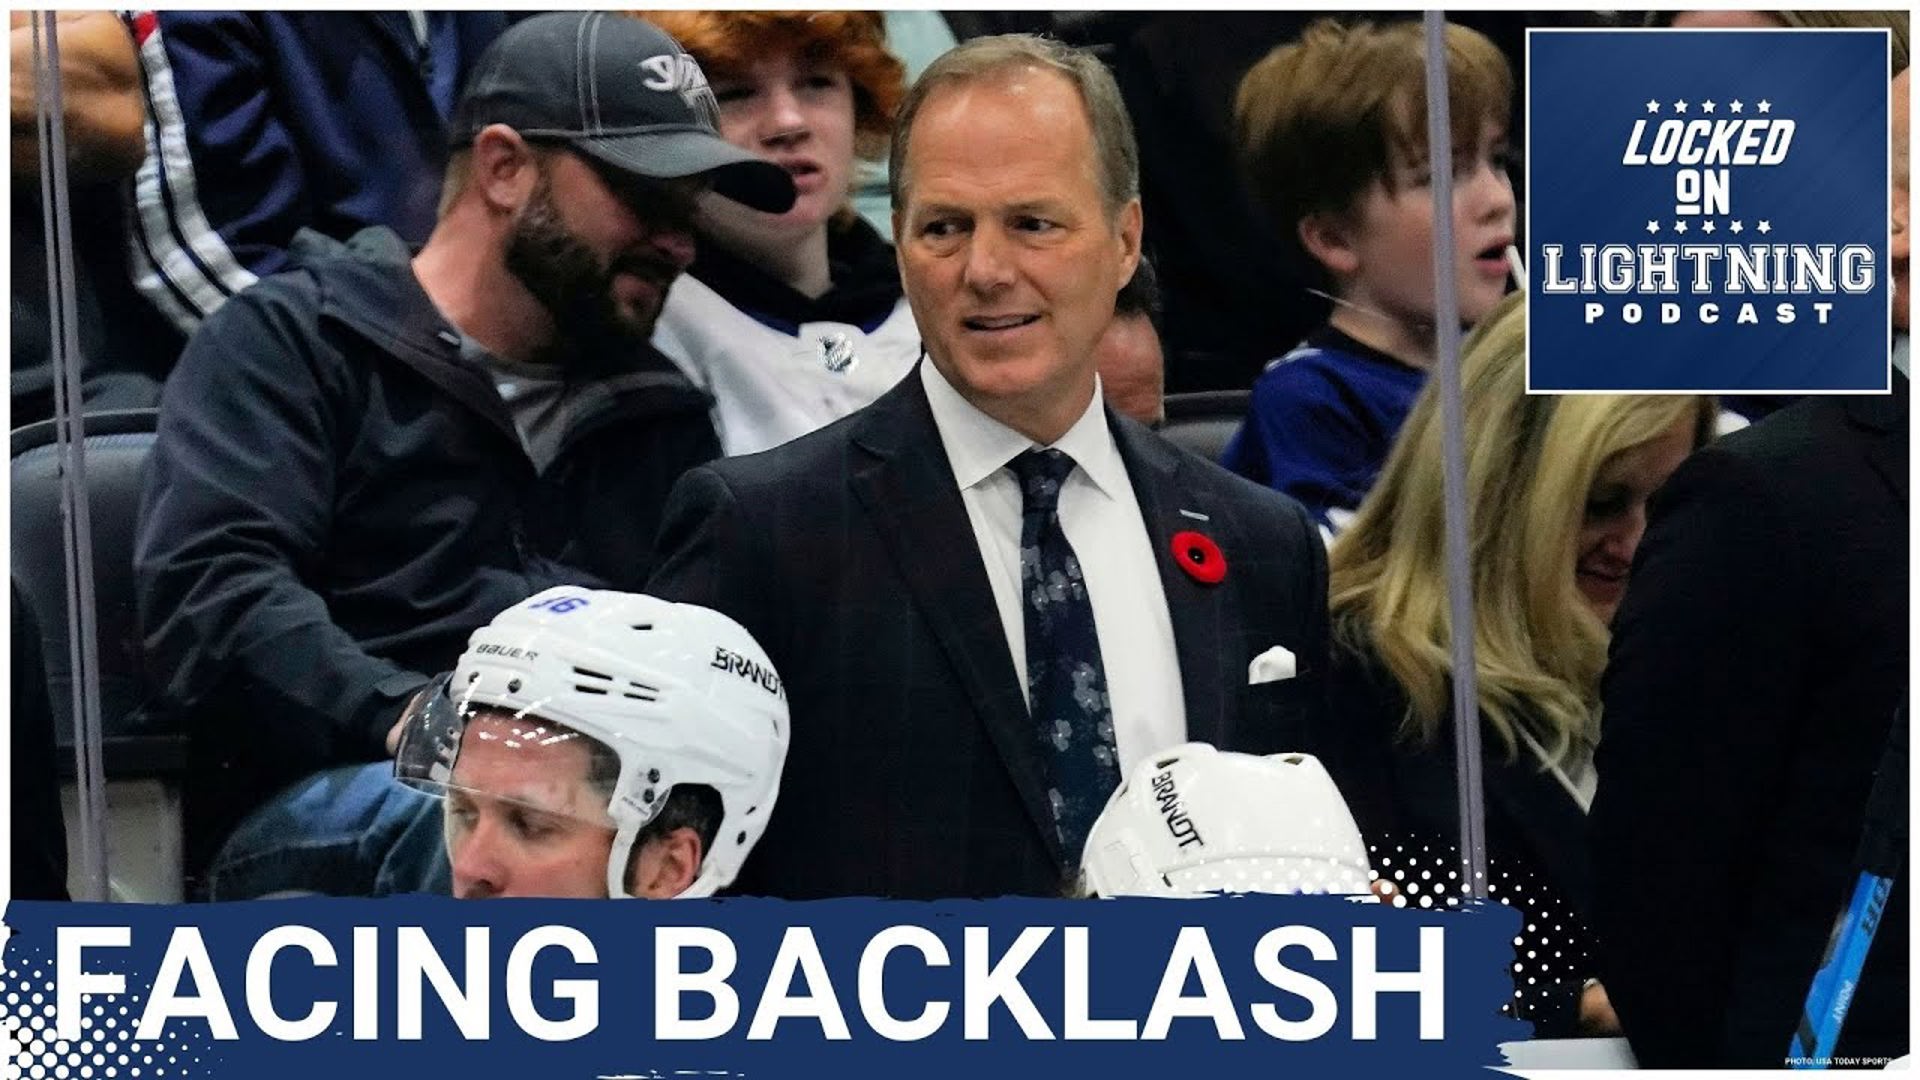 Jon Cooper had some choice words following Tampa's Game 5 loss last night. We discuss those comments and look at some of the backlash he is facing.